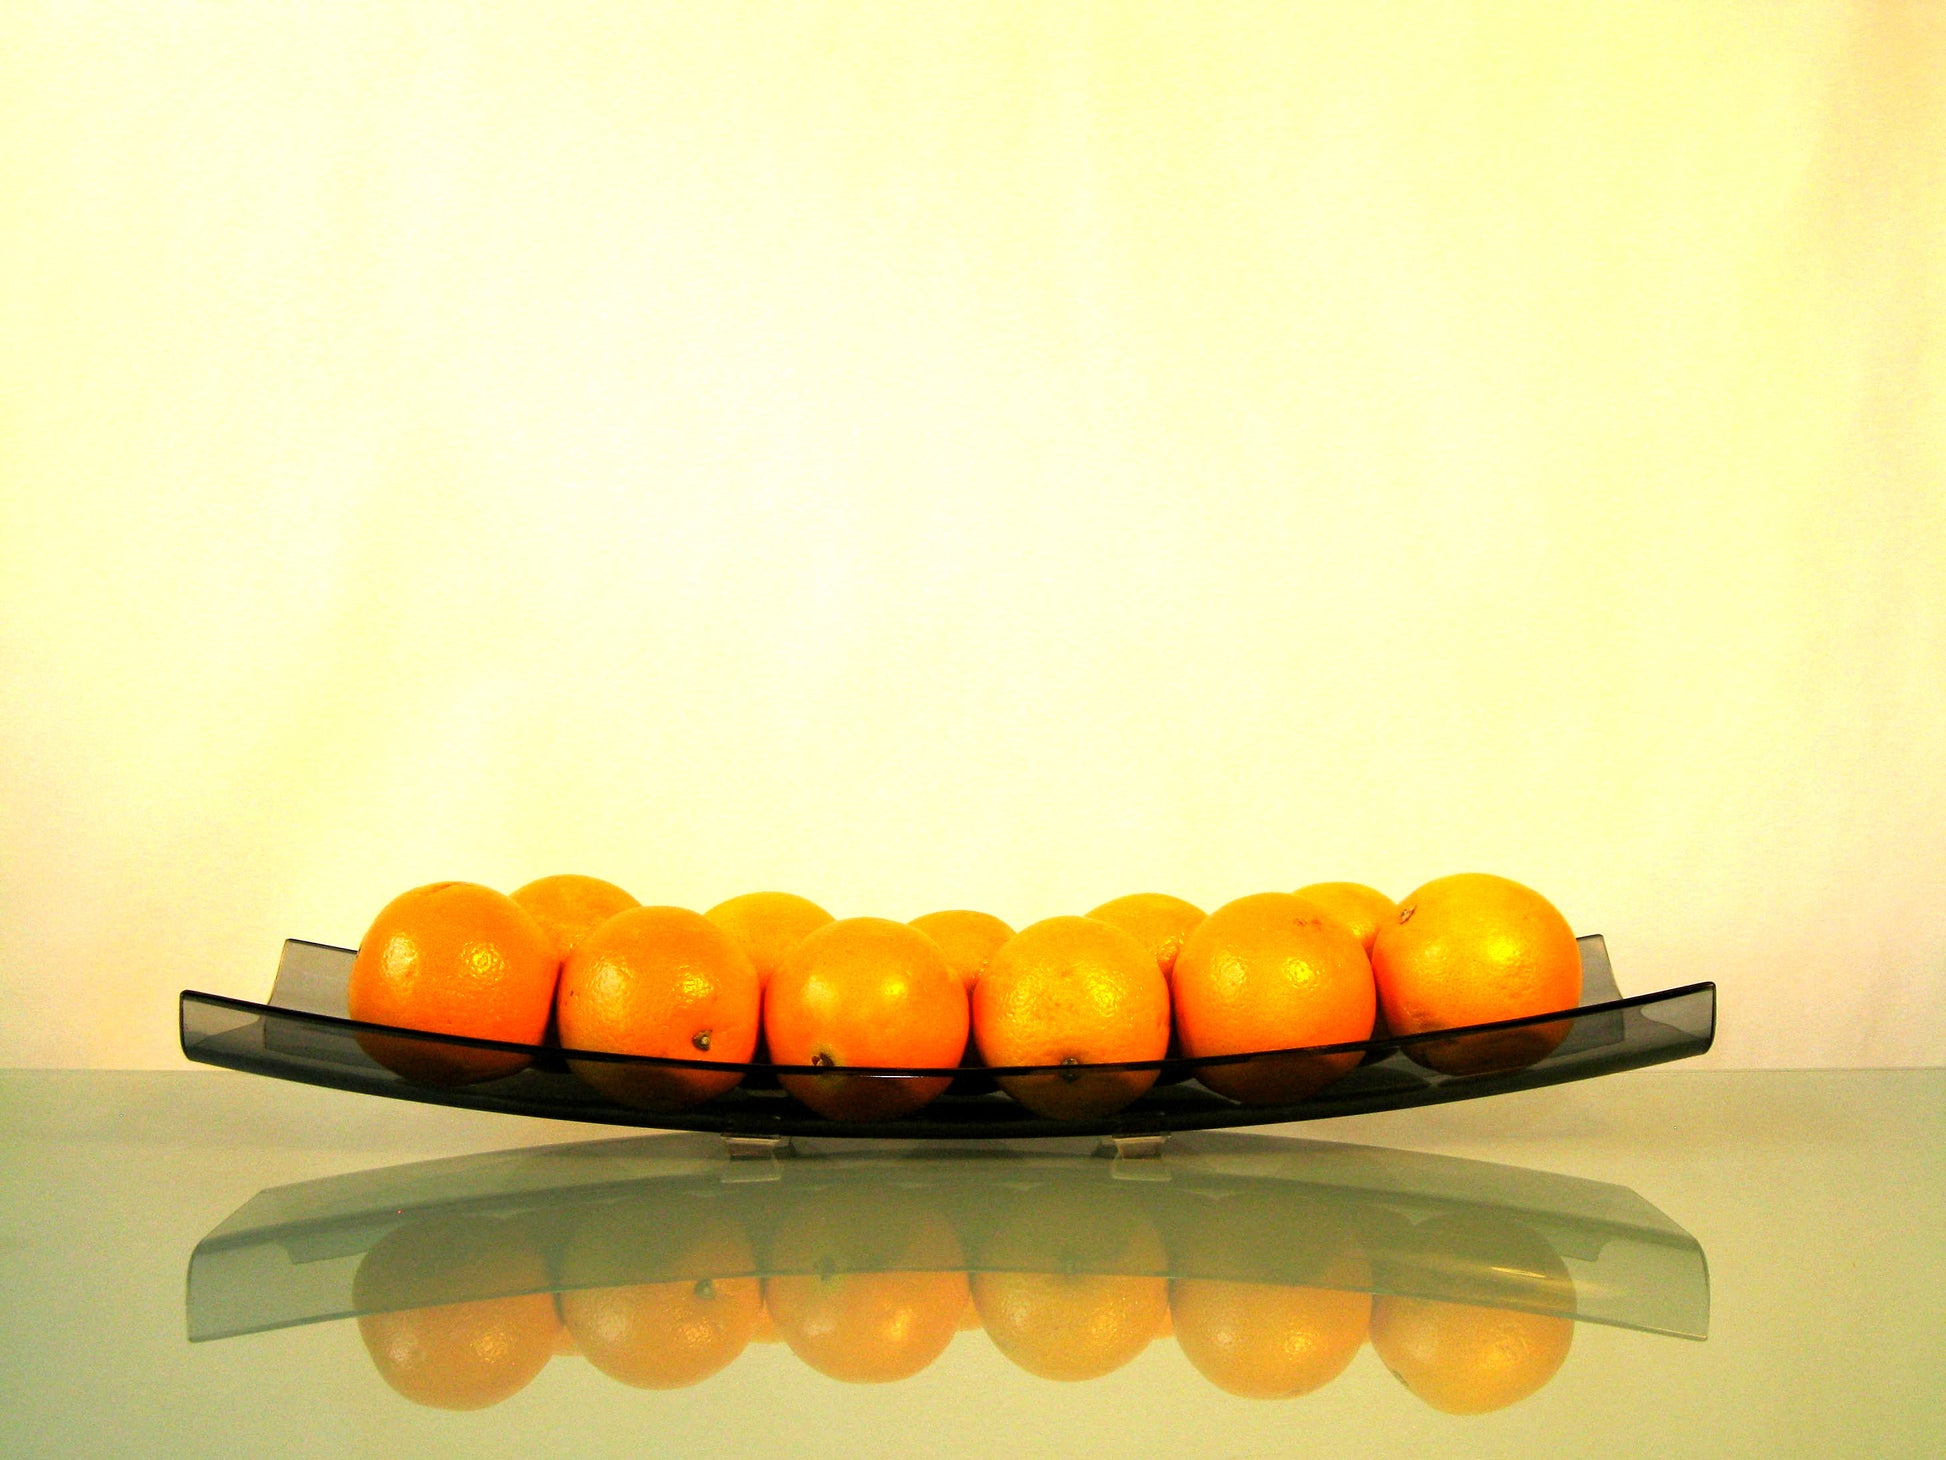 Zojila.com : Andora Fruit Holder, Independent Glass Fruit Tray, Smoky Black, 20" long 6" wide, 1.75" high : Kitchen and Dining